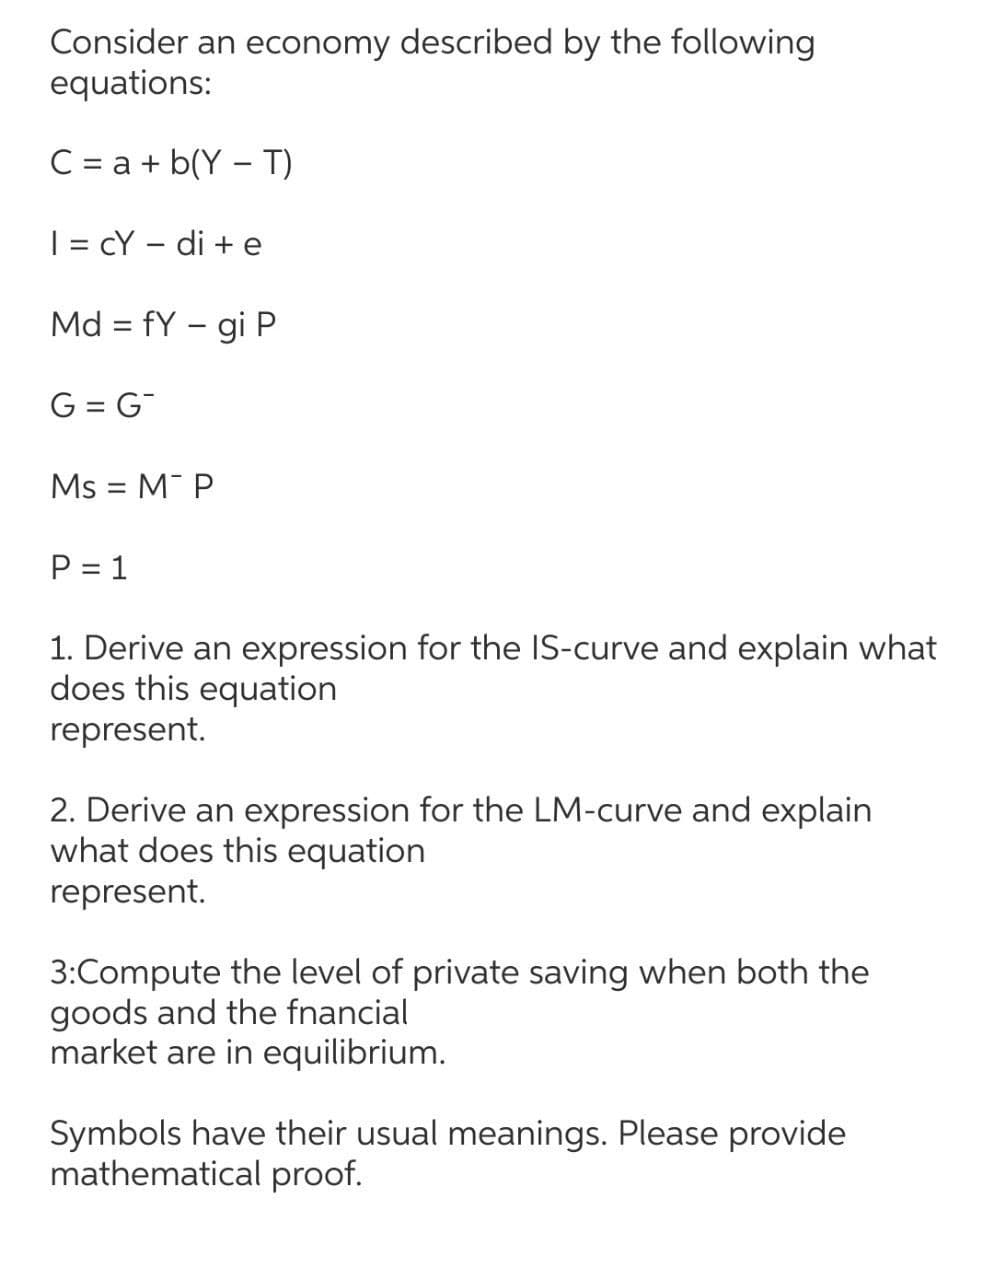 Consider an economy described by the following
equations:
C = a + b(Y – T)
| = cY – di + e
Md = fY – gi P
||
-
G = G
Ms = M P
P = 1
1. Derive an expression for the IS-curve and explain what
does this equation
represent.
2. Derive an expression for the LM-curve and explain
what does this equation
represent.
3:Compute the level of private saving when both the
goods and the fnancial
market are in equilibrium.
Symbols have their usual meanings. Please provide
mathematical proof.
